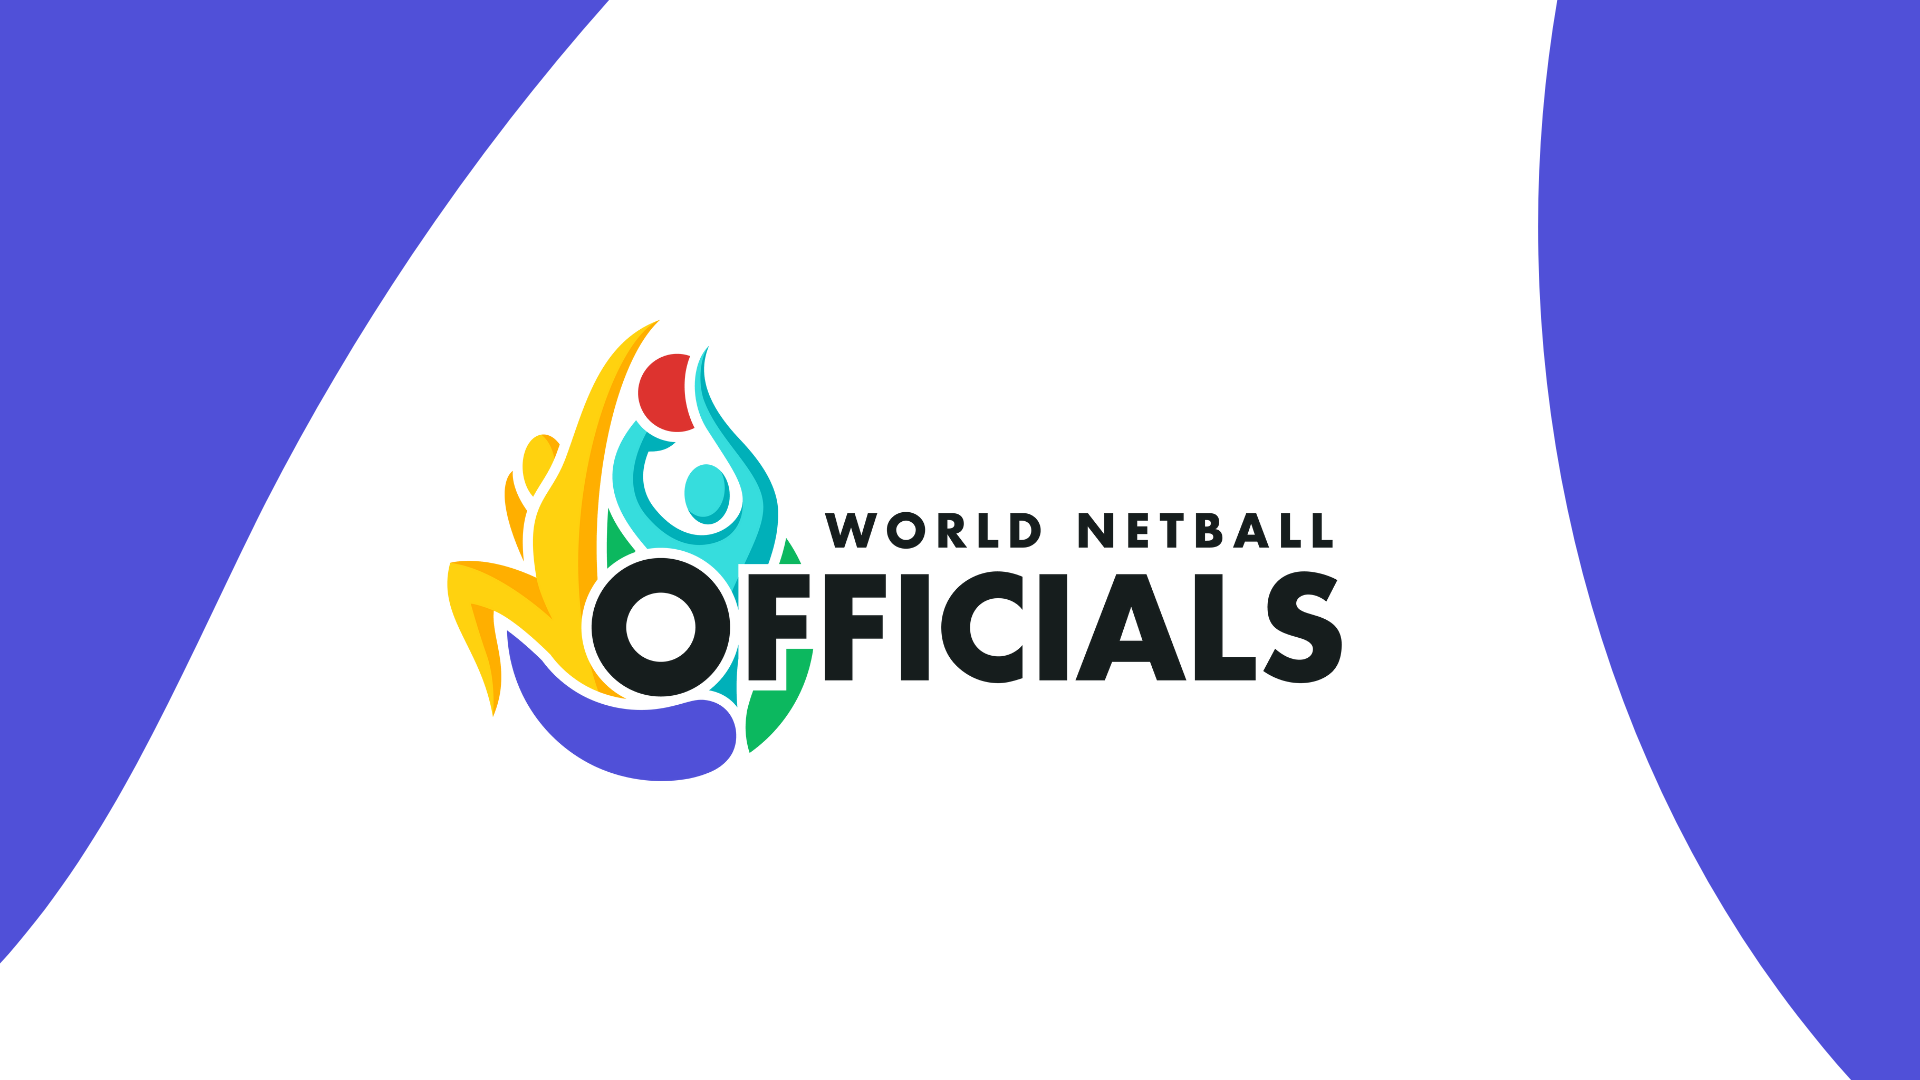 A team of 19 international technical officials and 23 national technical officials have been selected to assist with the netball tournament at Birmingham 2022 ©Getty Images